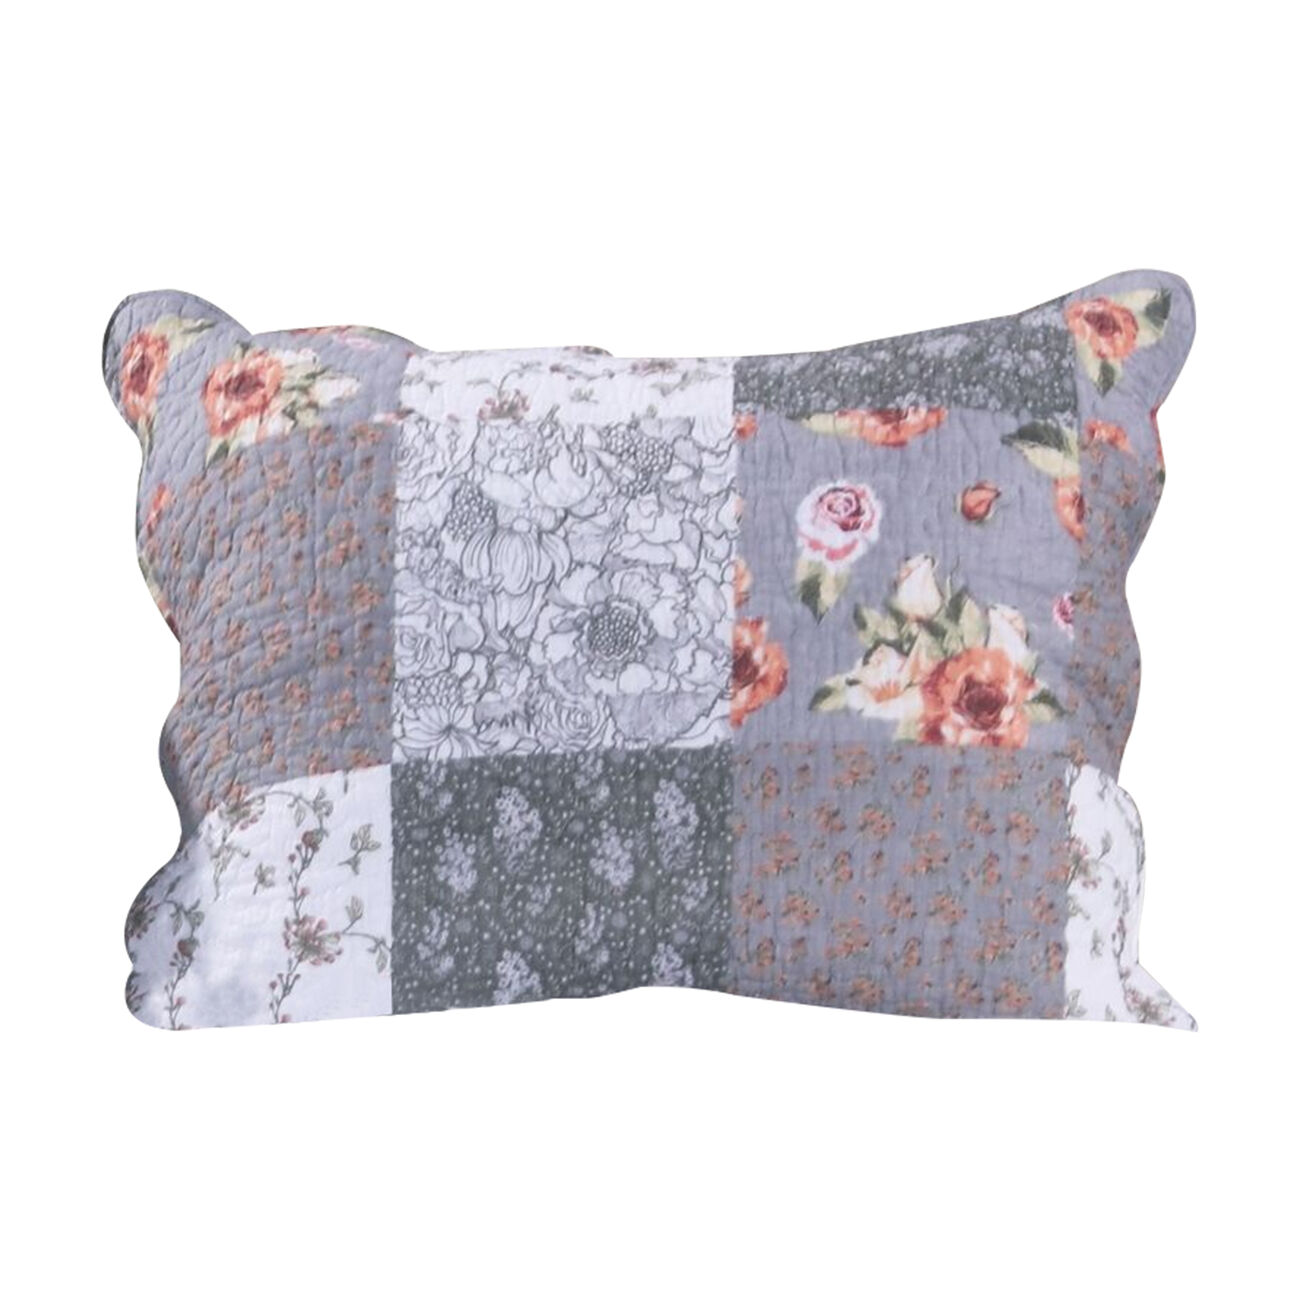 Fabric Reversible Pillow Sham with Floral Print and Scalloped Ends, Gray